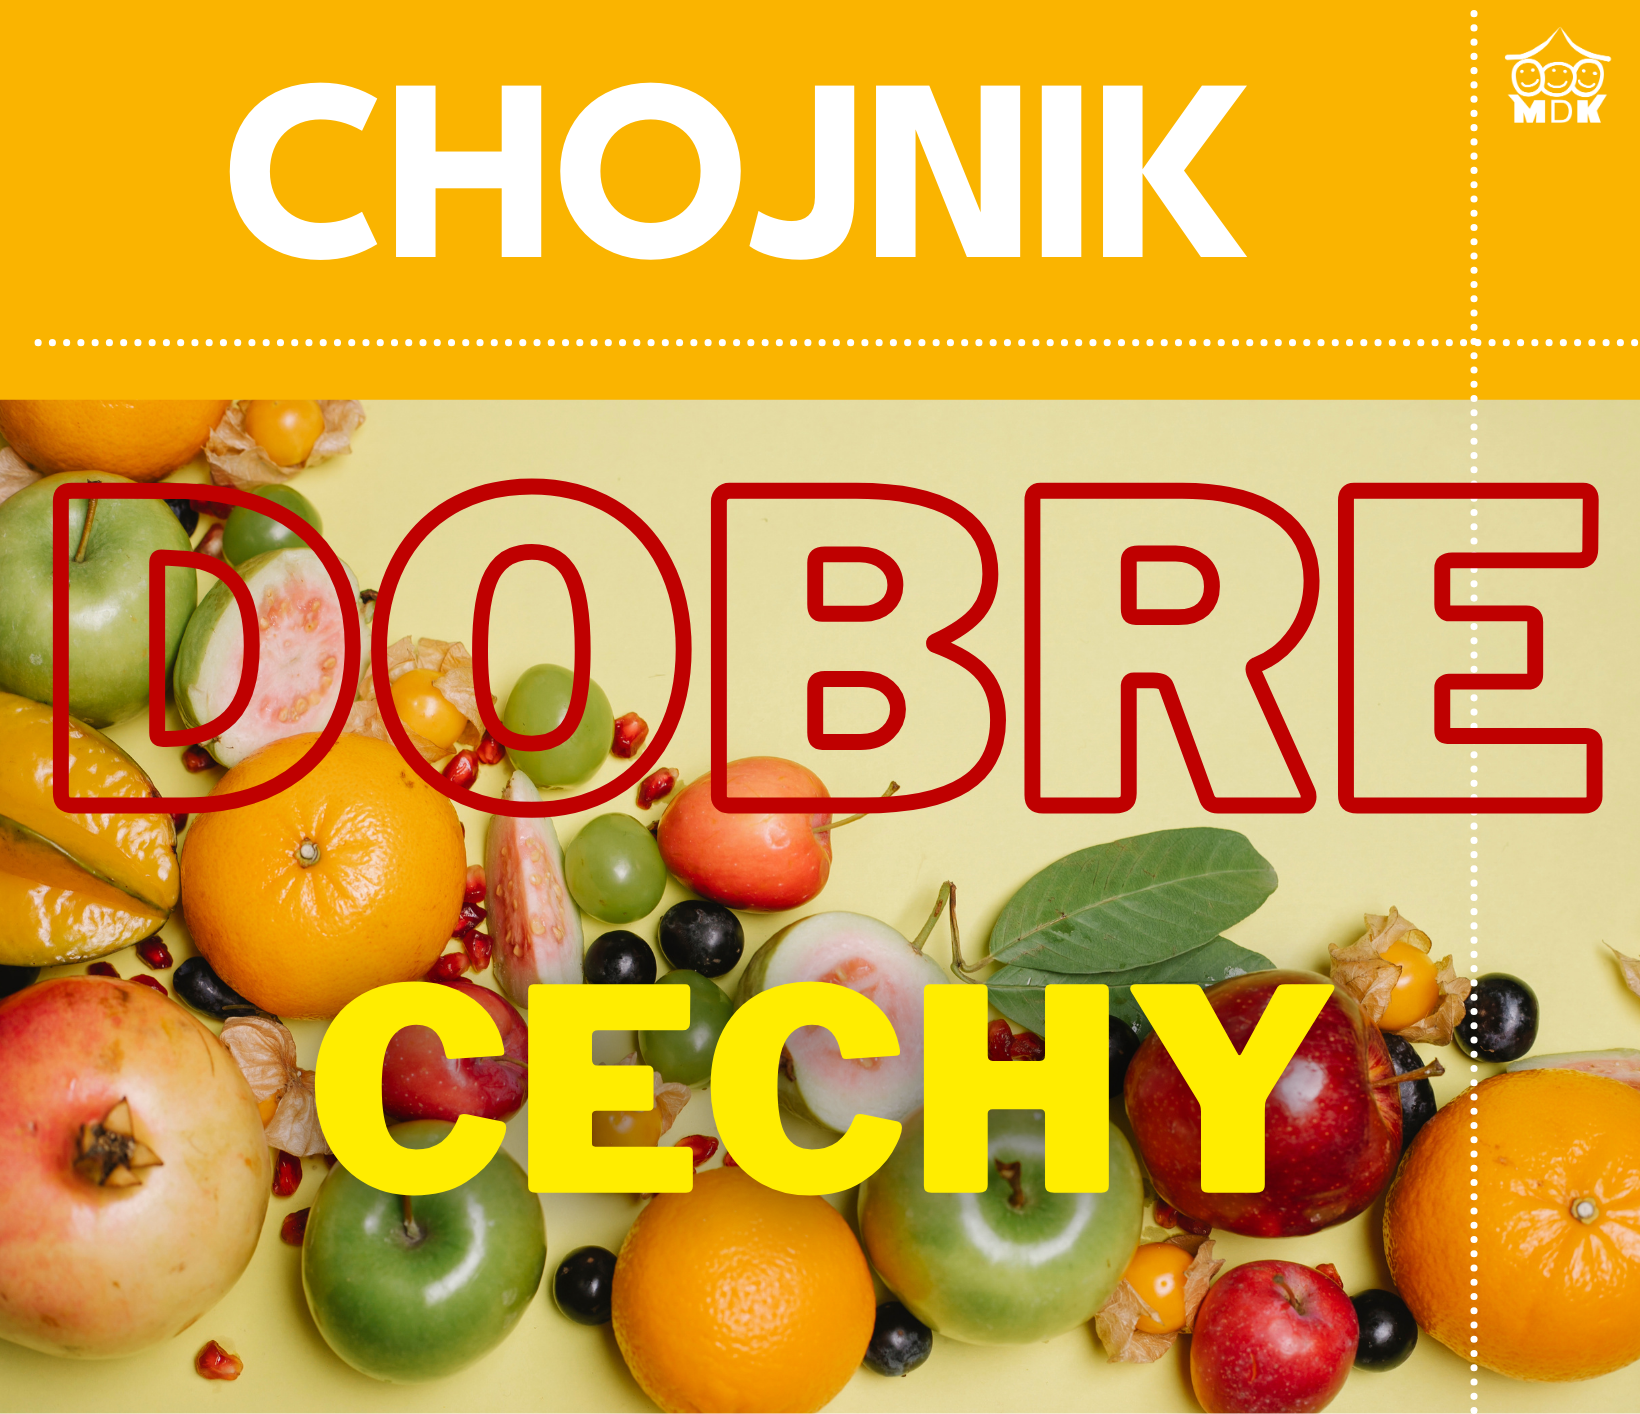 You are currently viewing Dobre cechy